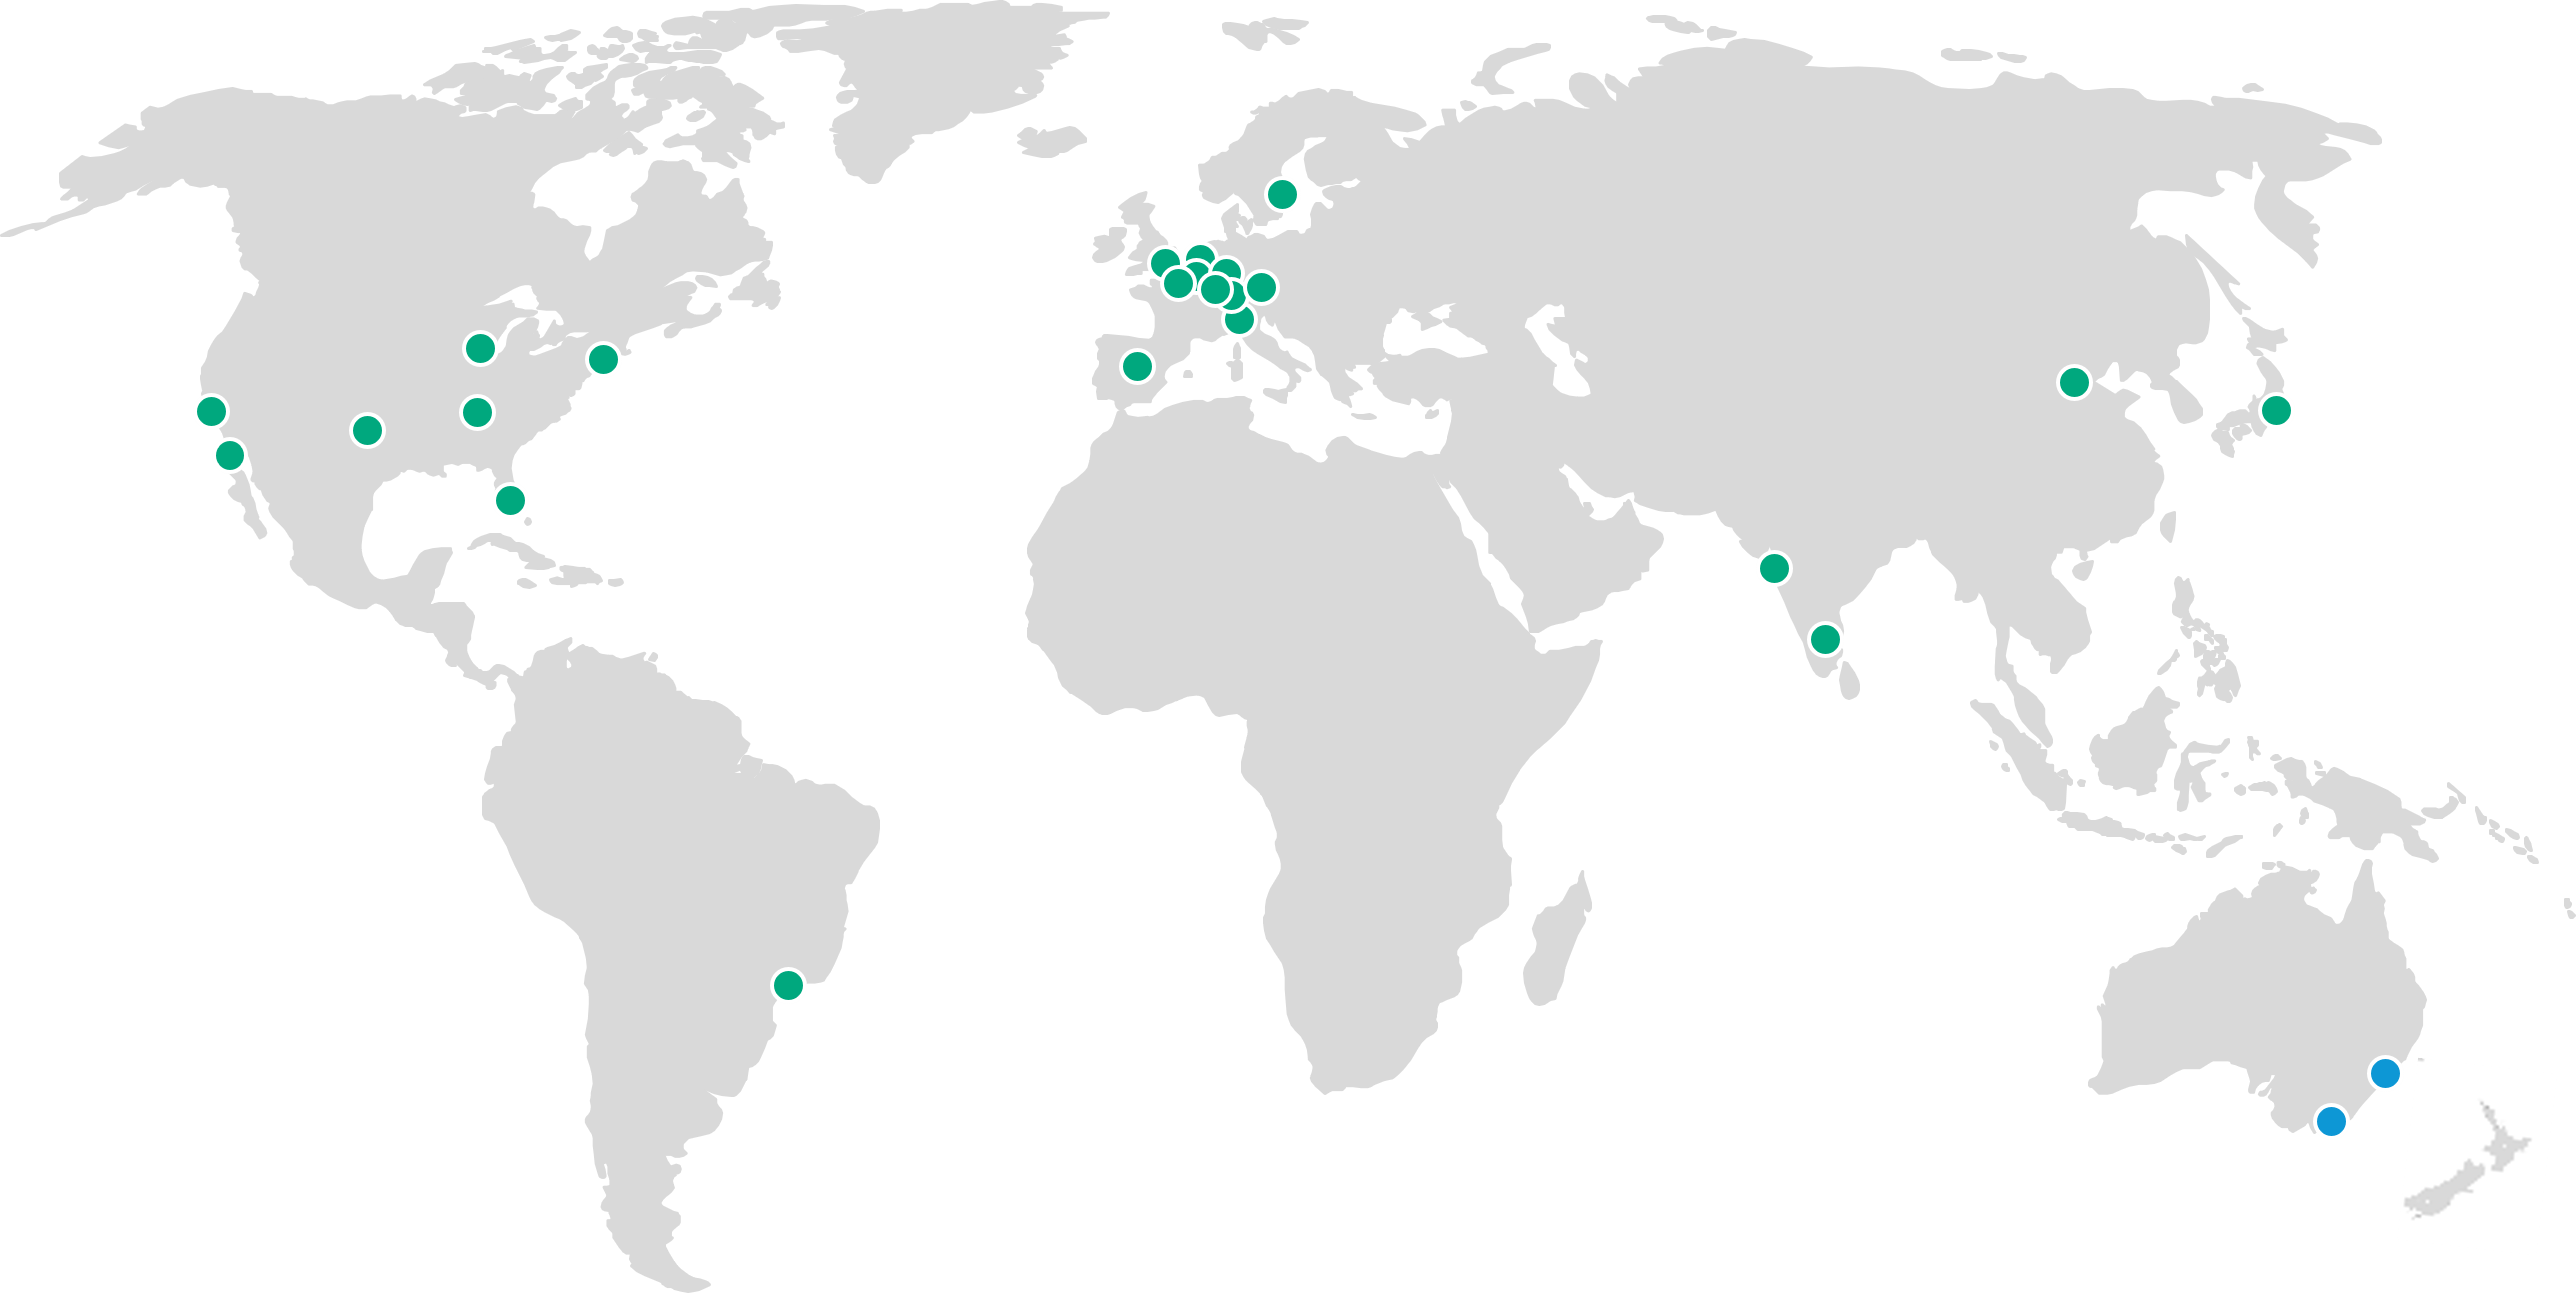 World map showing office locations for Miles and Lincoln International